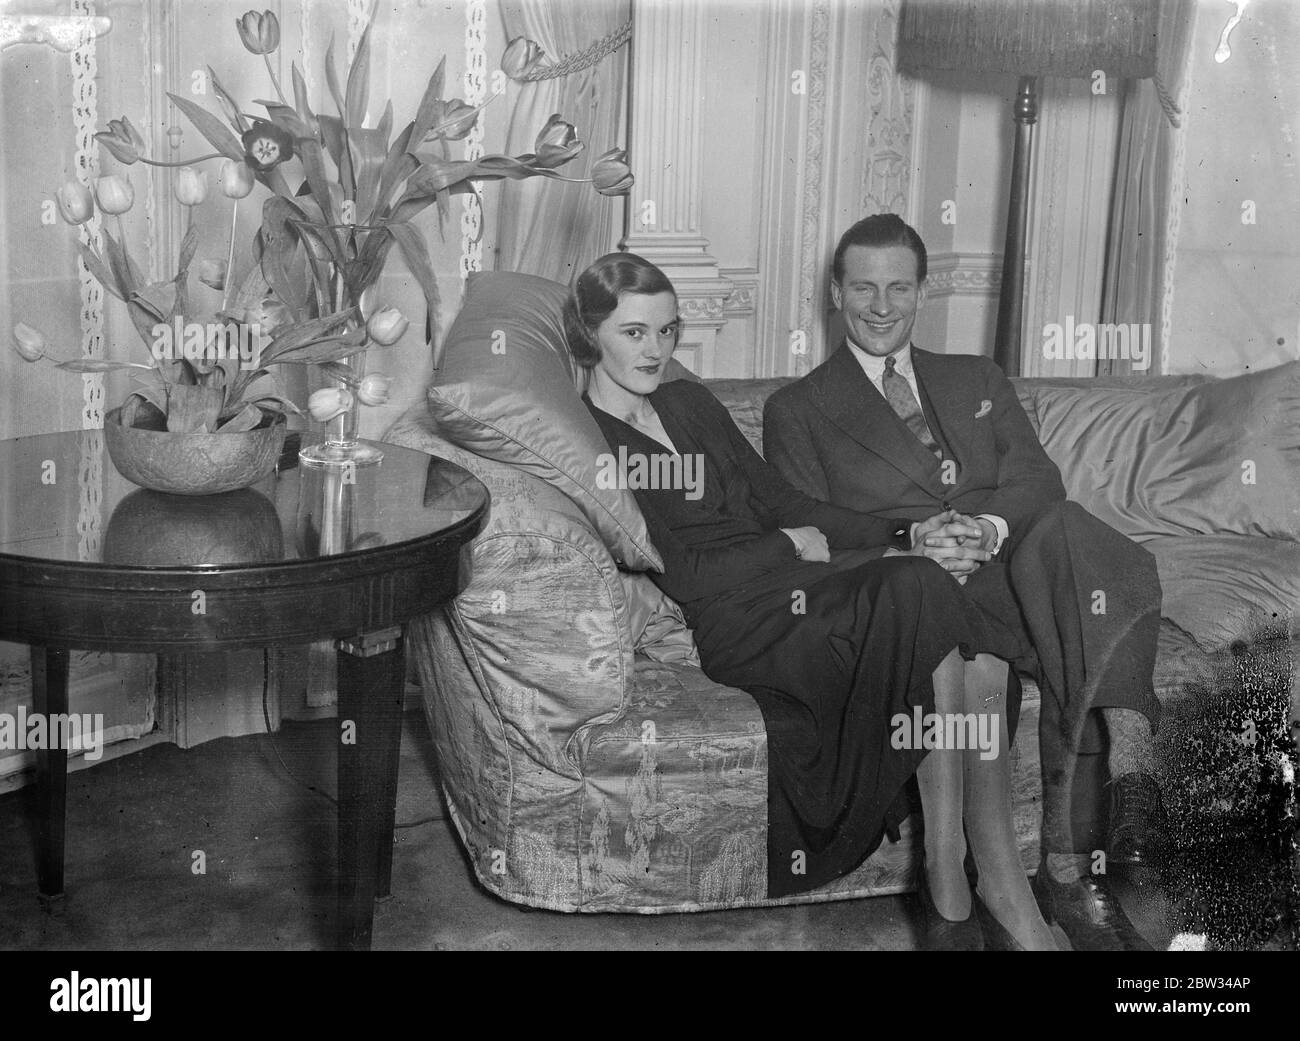 Daughter of Lady Janet Lacon and fiance in London for Tuesday wedding . Miss Dorothy Beecroft Sheila Lacon , daughter of Lady Janet Lacon , and her fiance Mr Robert Desmond Ropner , who are to be married at St Margaret ' s Westminster on Tuesday photographed in London while making preparations for their wedding . 24 January 1932 Stock Photo